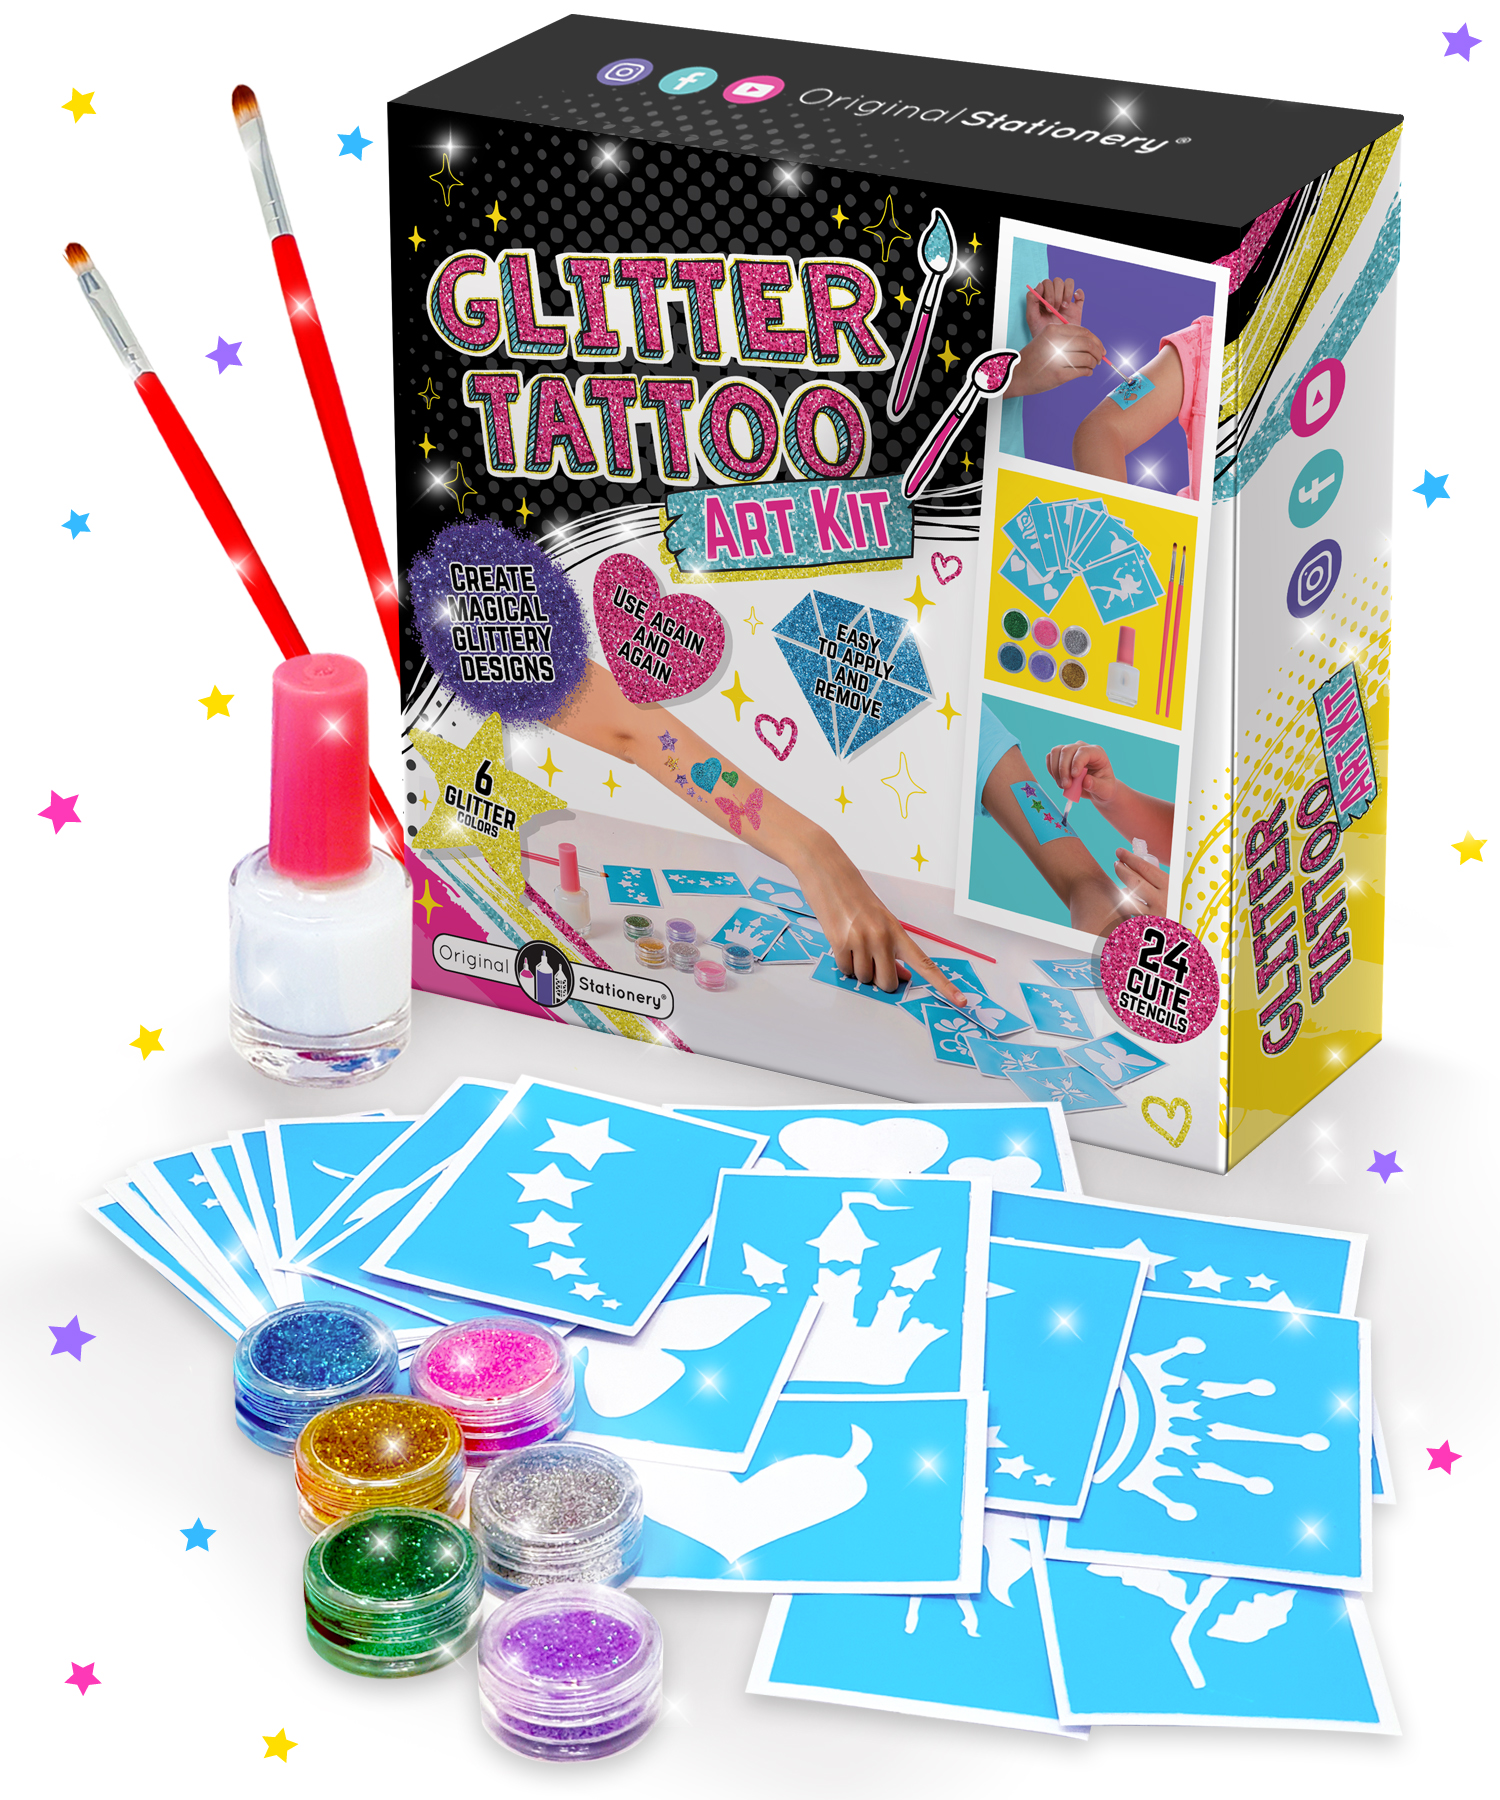 Are there any pros or cons to getting a glitter tattoo? - Quora